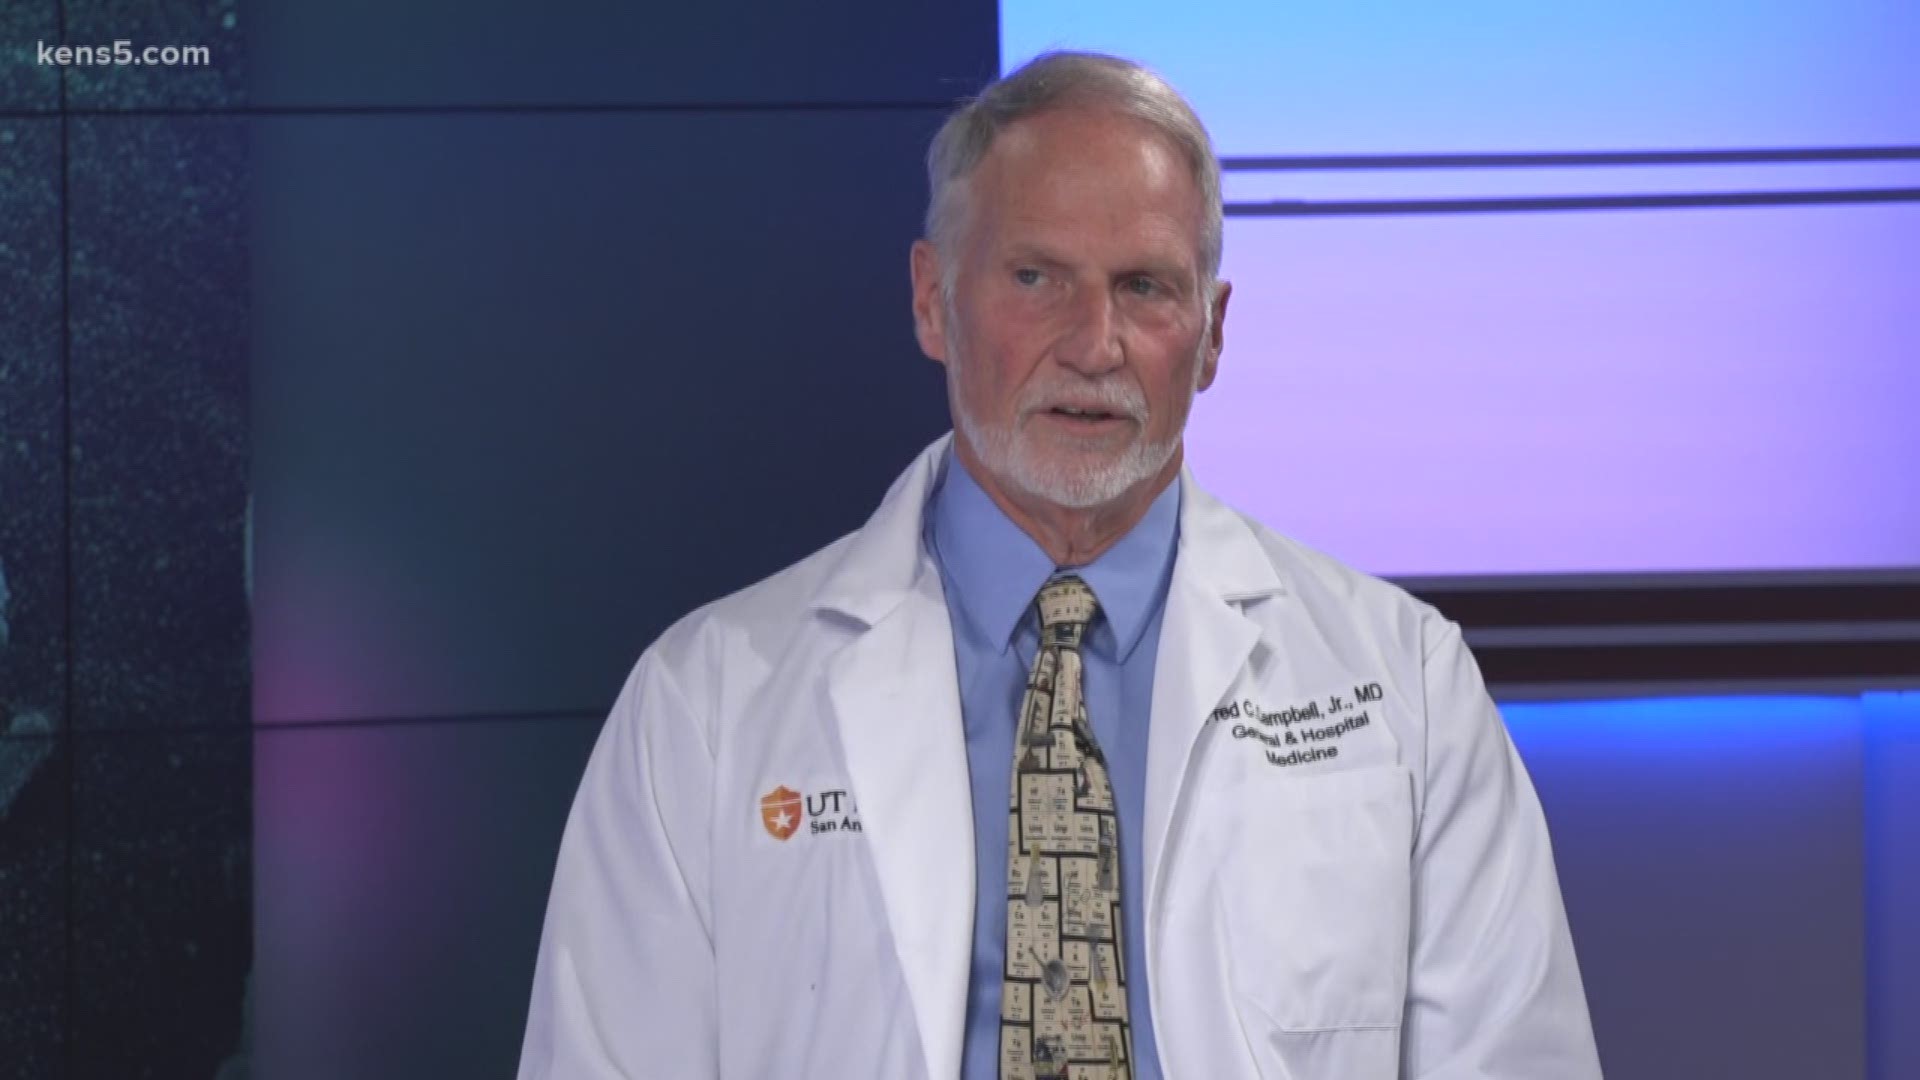 Dr. Fred Campbell of UT Health San Antonio answers questions about the spread of coronavirus after a patient released from quarantine in San Antonio tested positive.